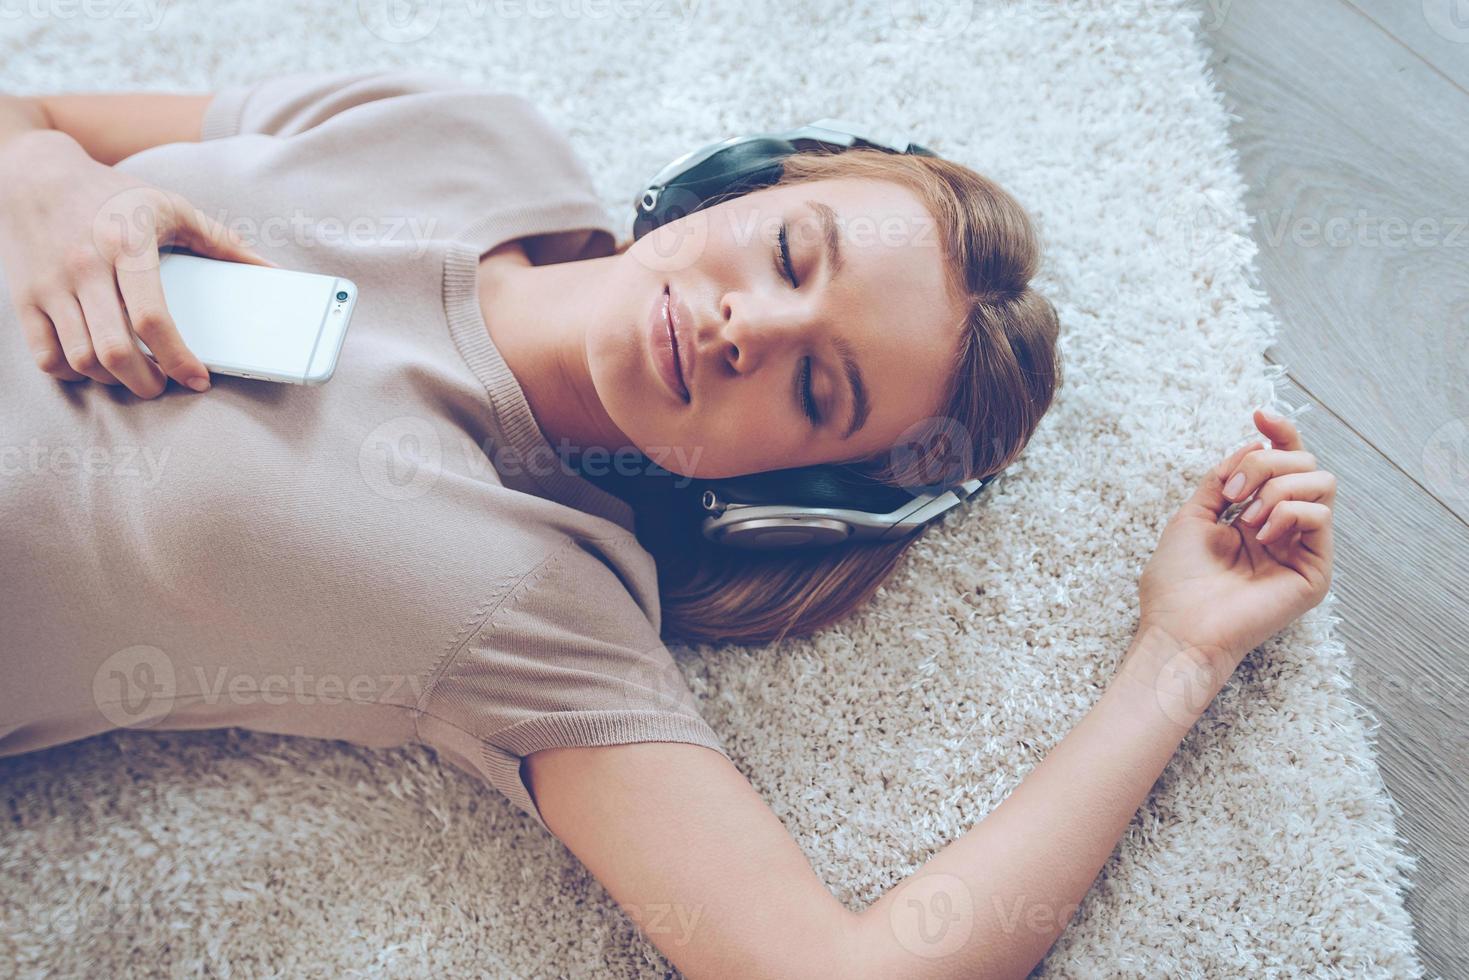 Feeling calm. Top view of beautiful young woman listening to music and keeping eyes closed while lying on carpet at home photo